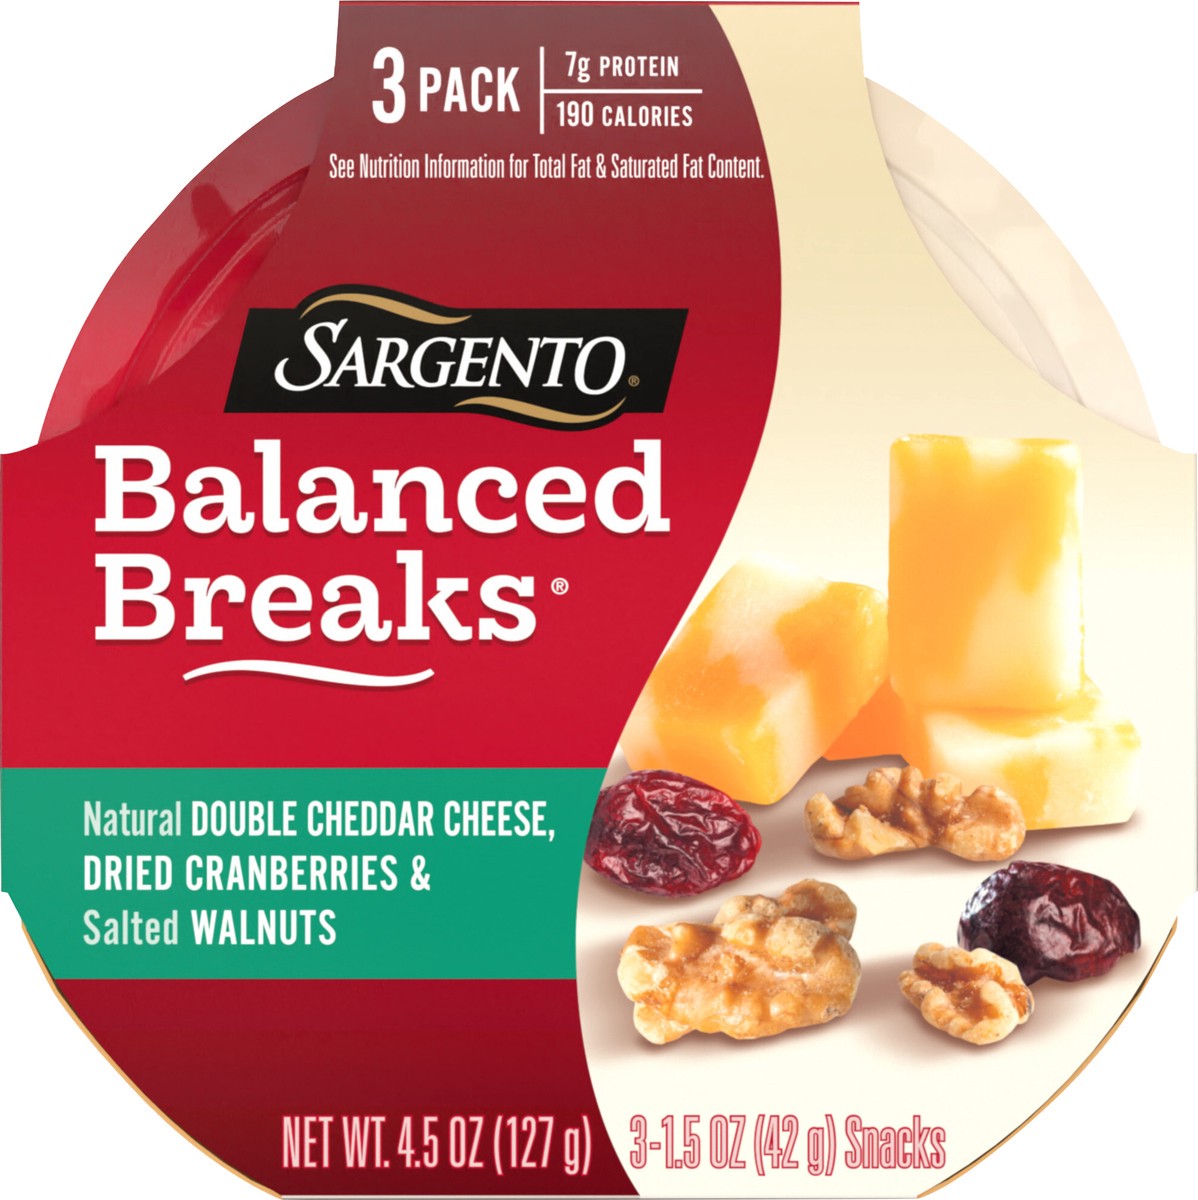 slide 14 of 14, Sargento Balanced Breaks with Natural Double Cheddar Cheese, Dried Cranberries and Salted Walnuts, 1.5 oz., 3-Pack, 4.5 oz